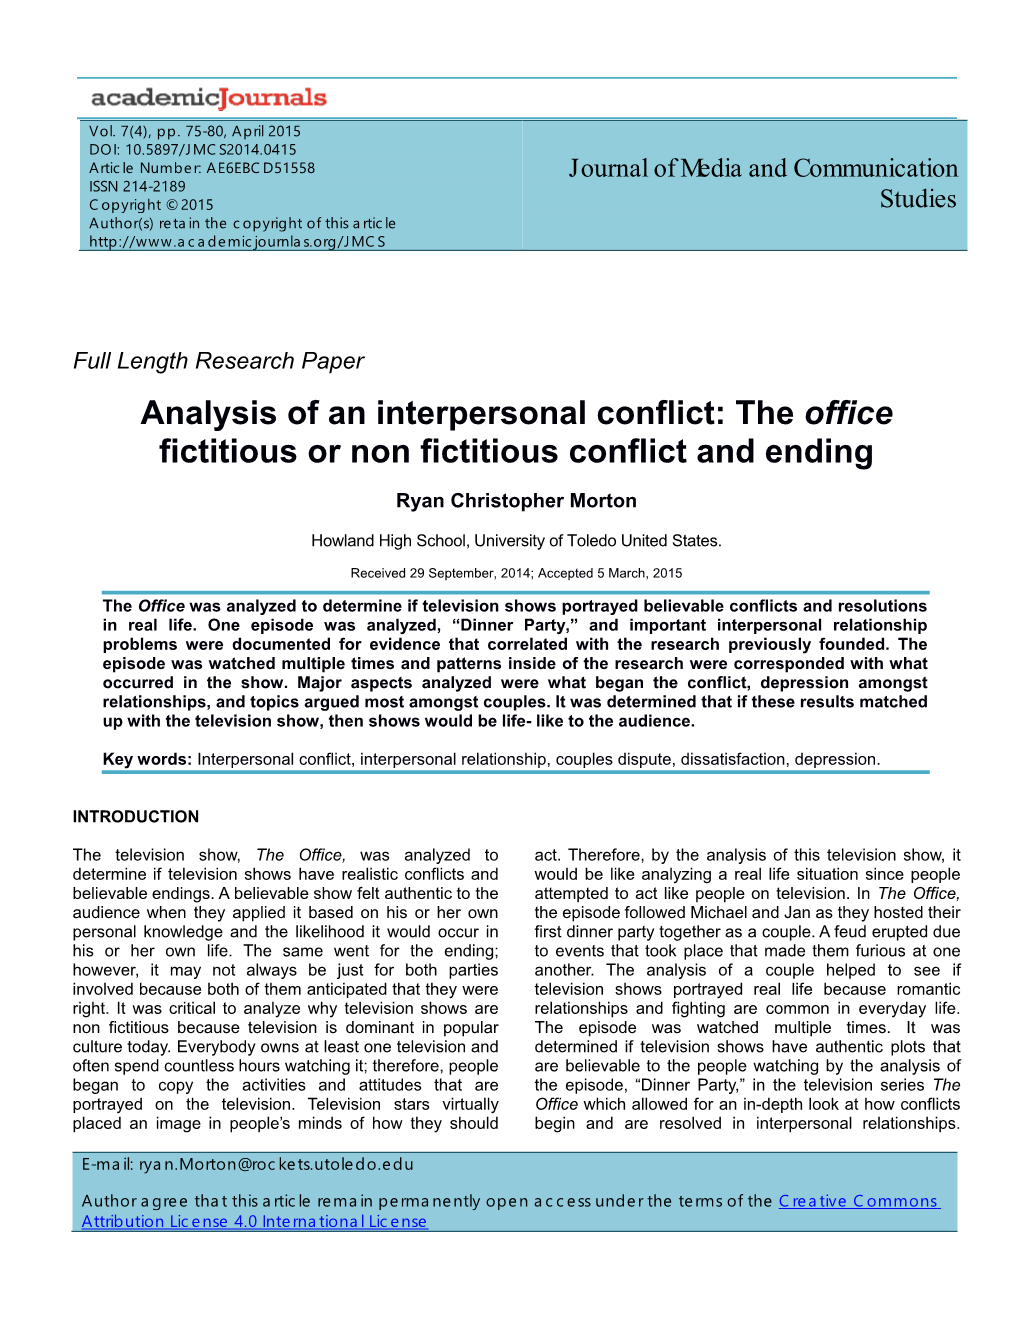 Analysis of an Interpersonal Conflict: the Office Fictitious Or Non Fictitious Conflict and Ending